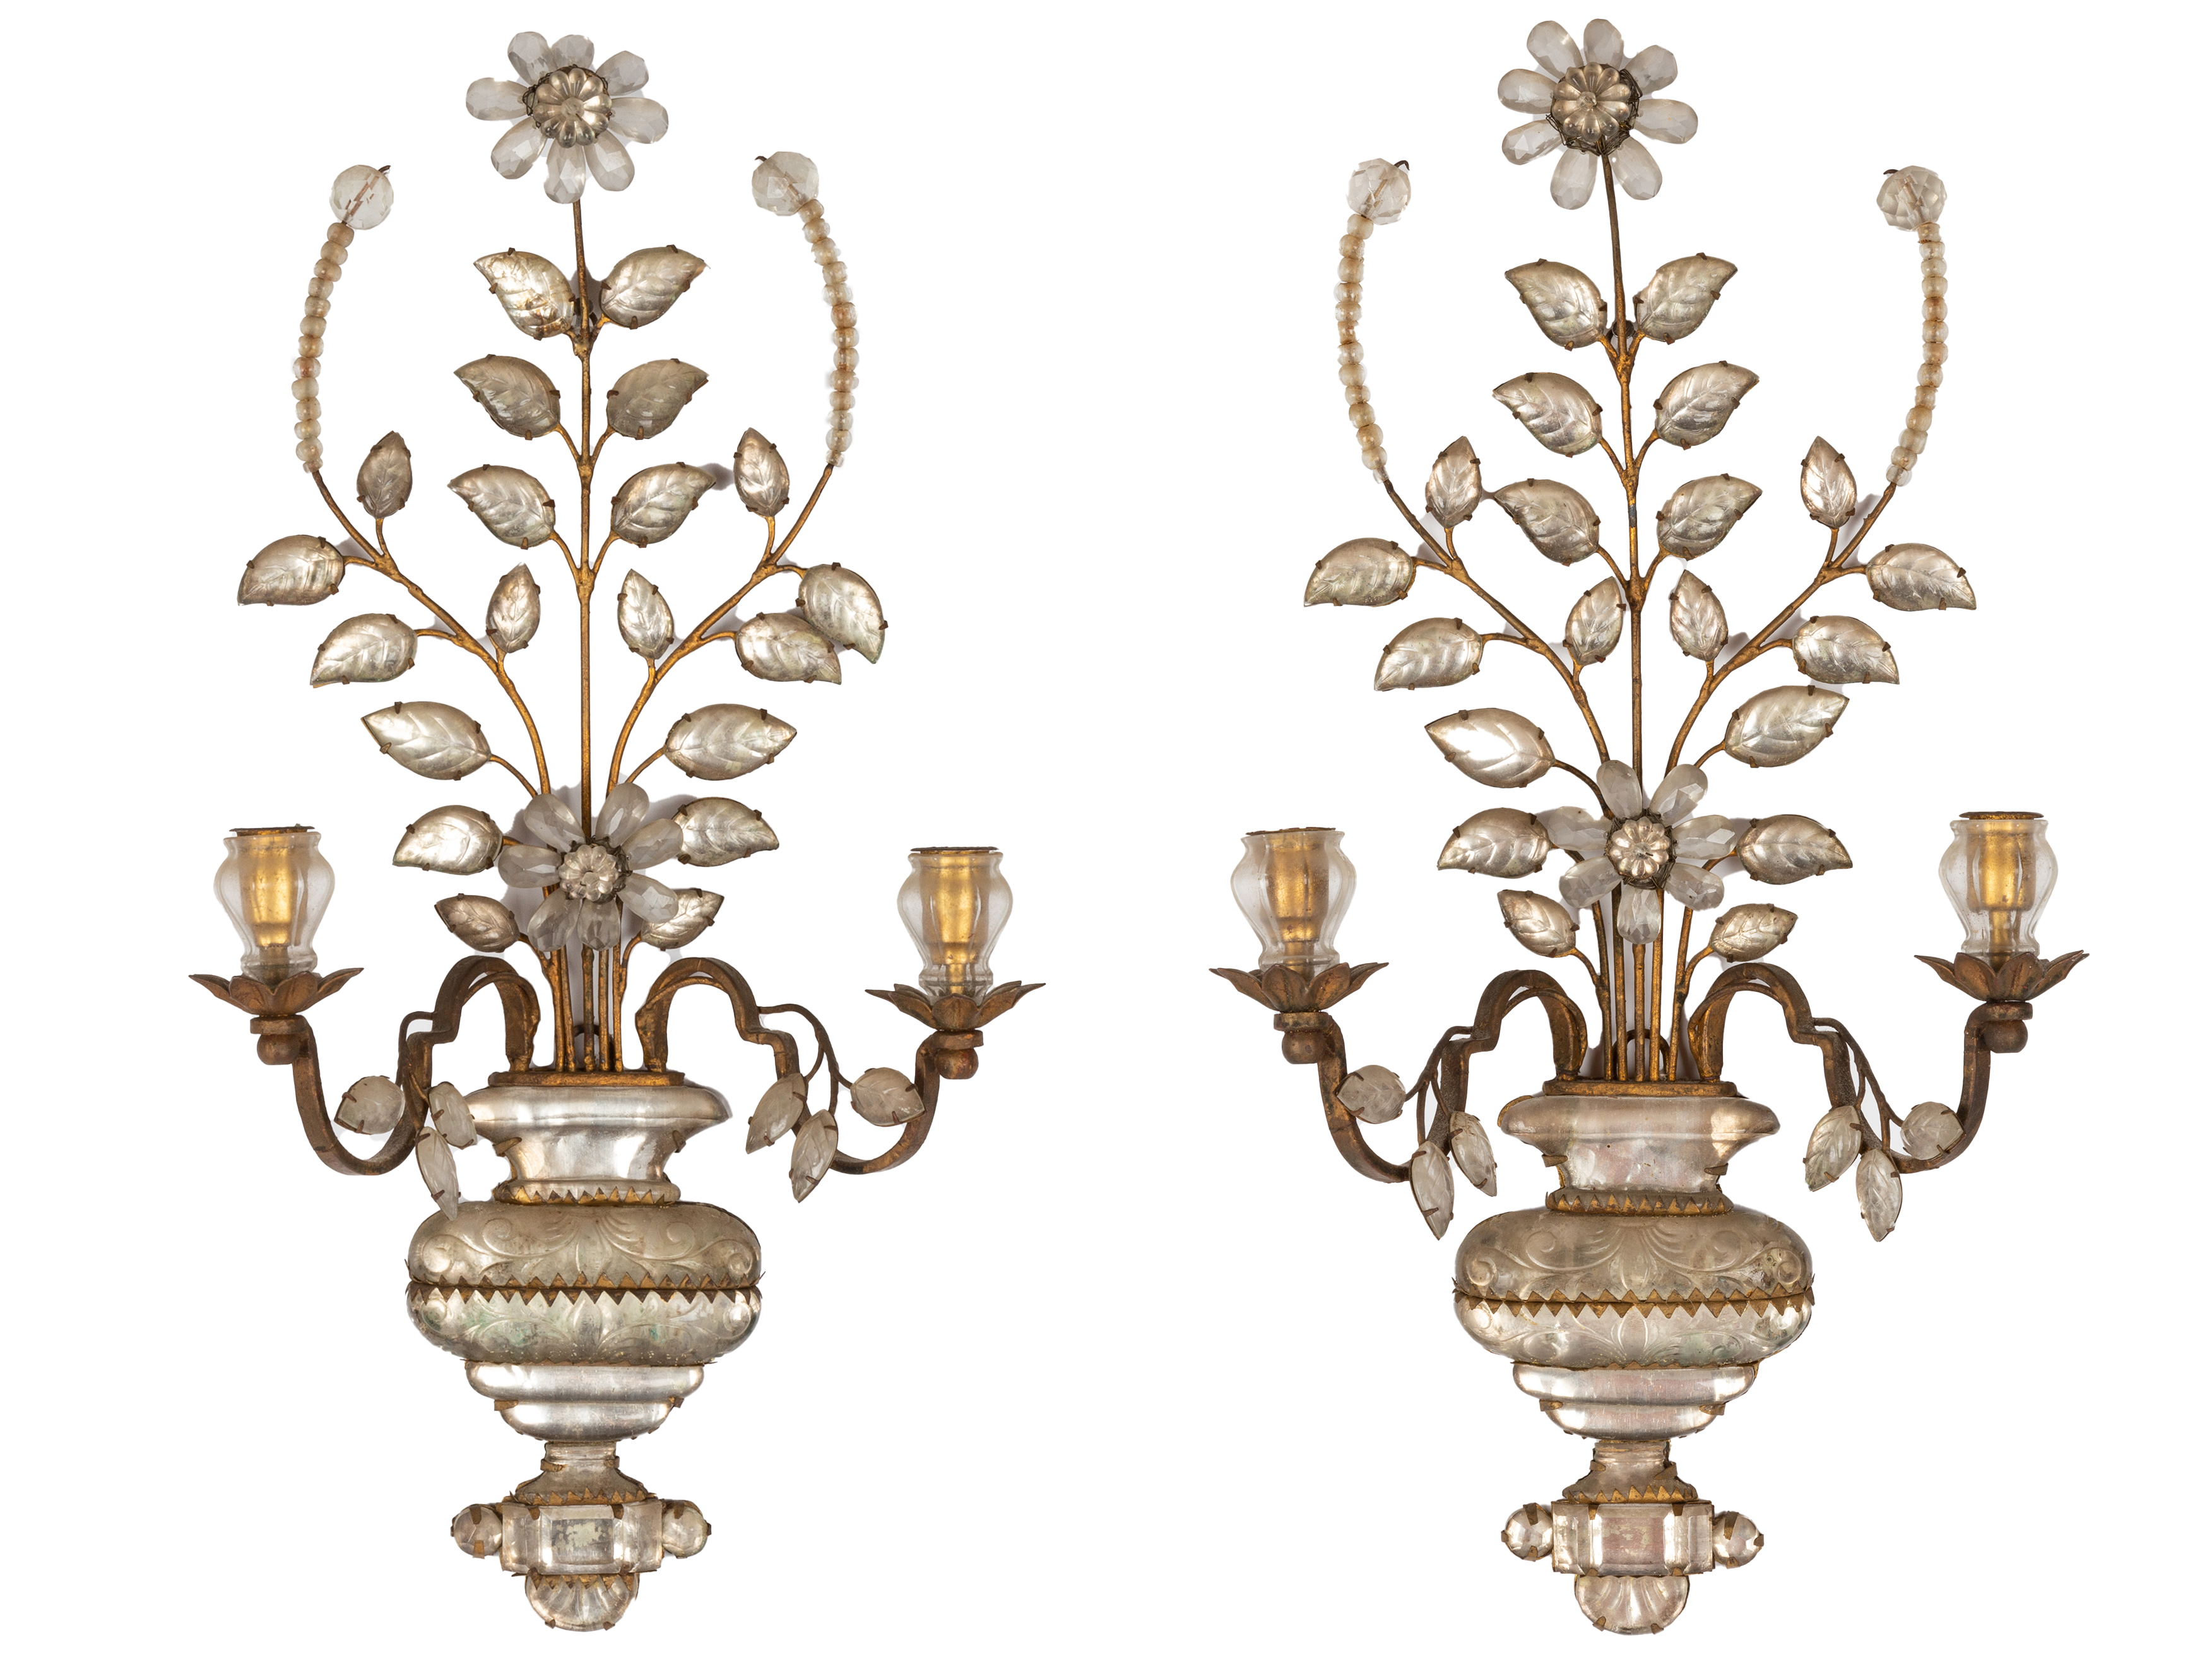 PAIR OF ROCCO ROCK CRYSTAL GILT 2c8706